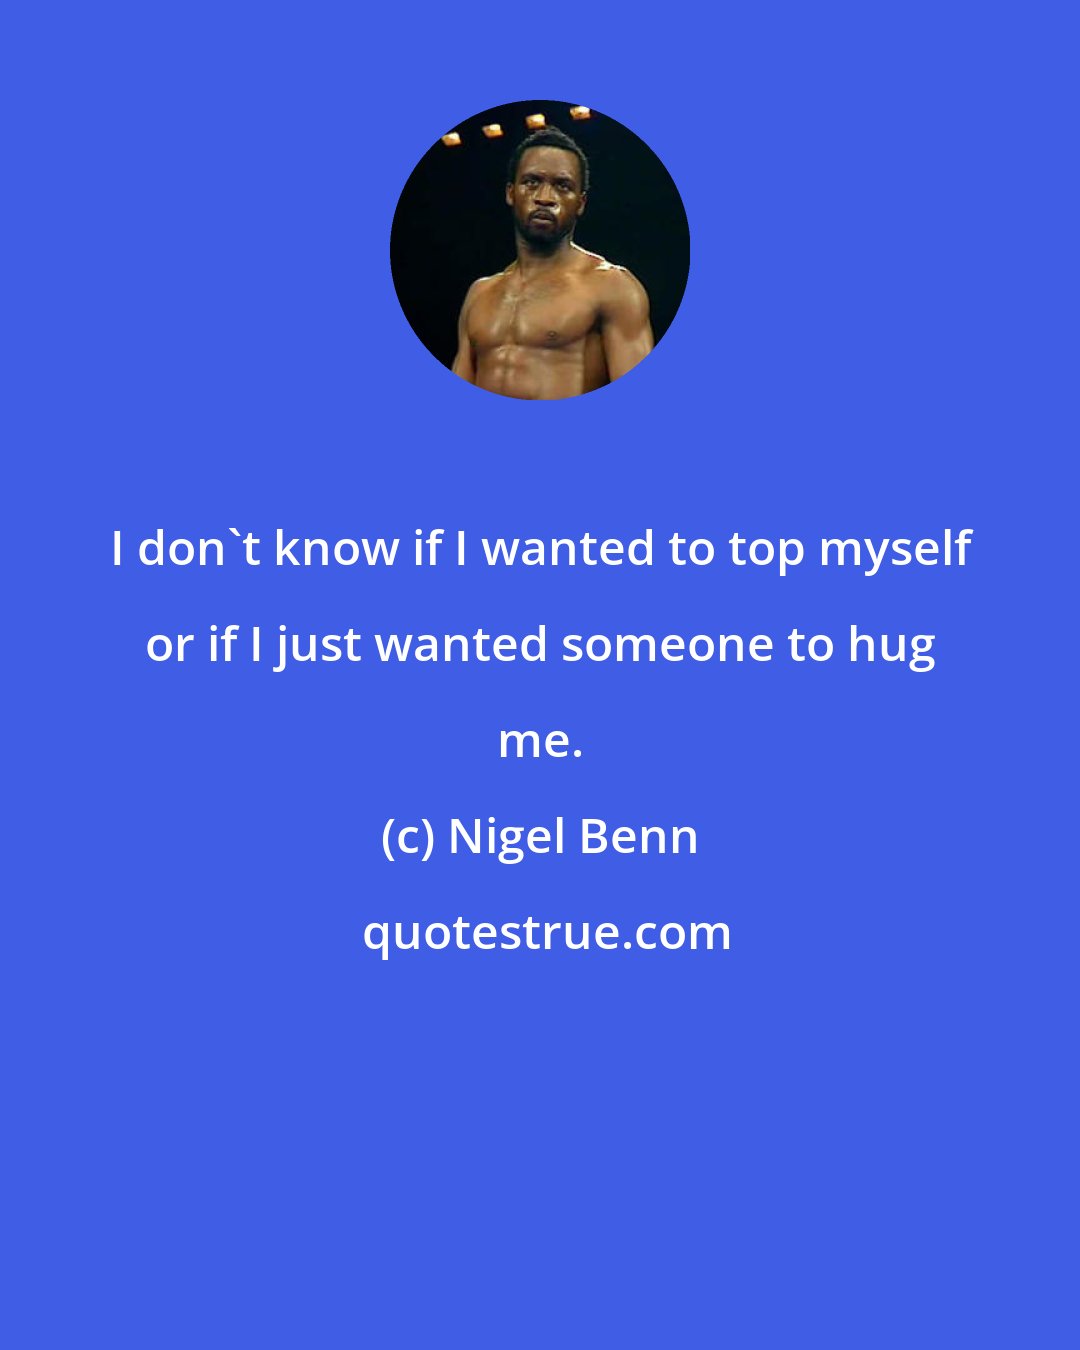 Nigel Benn: I don't know if I wanted to top myself or if I just wanted someone to hug me.